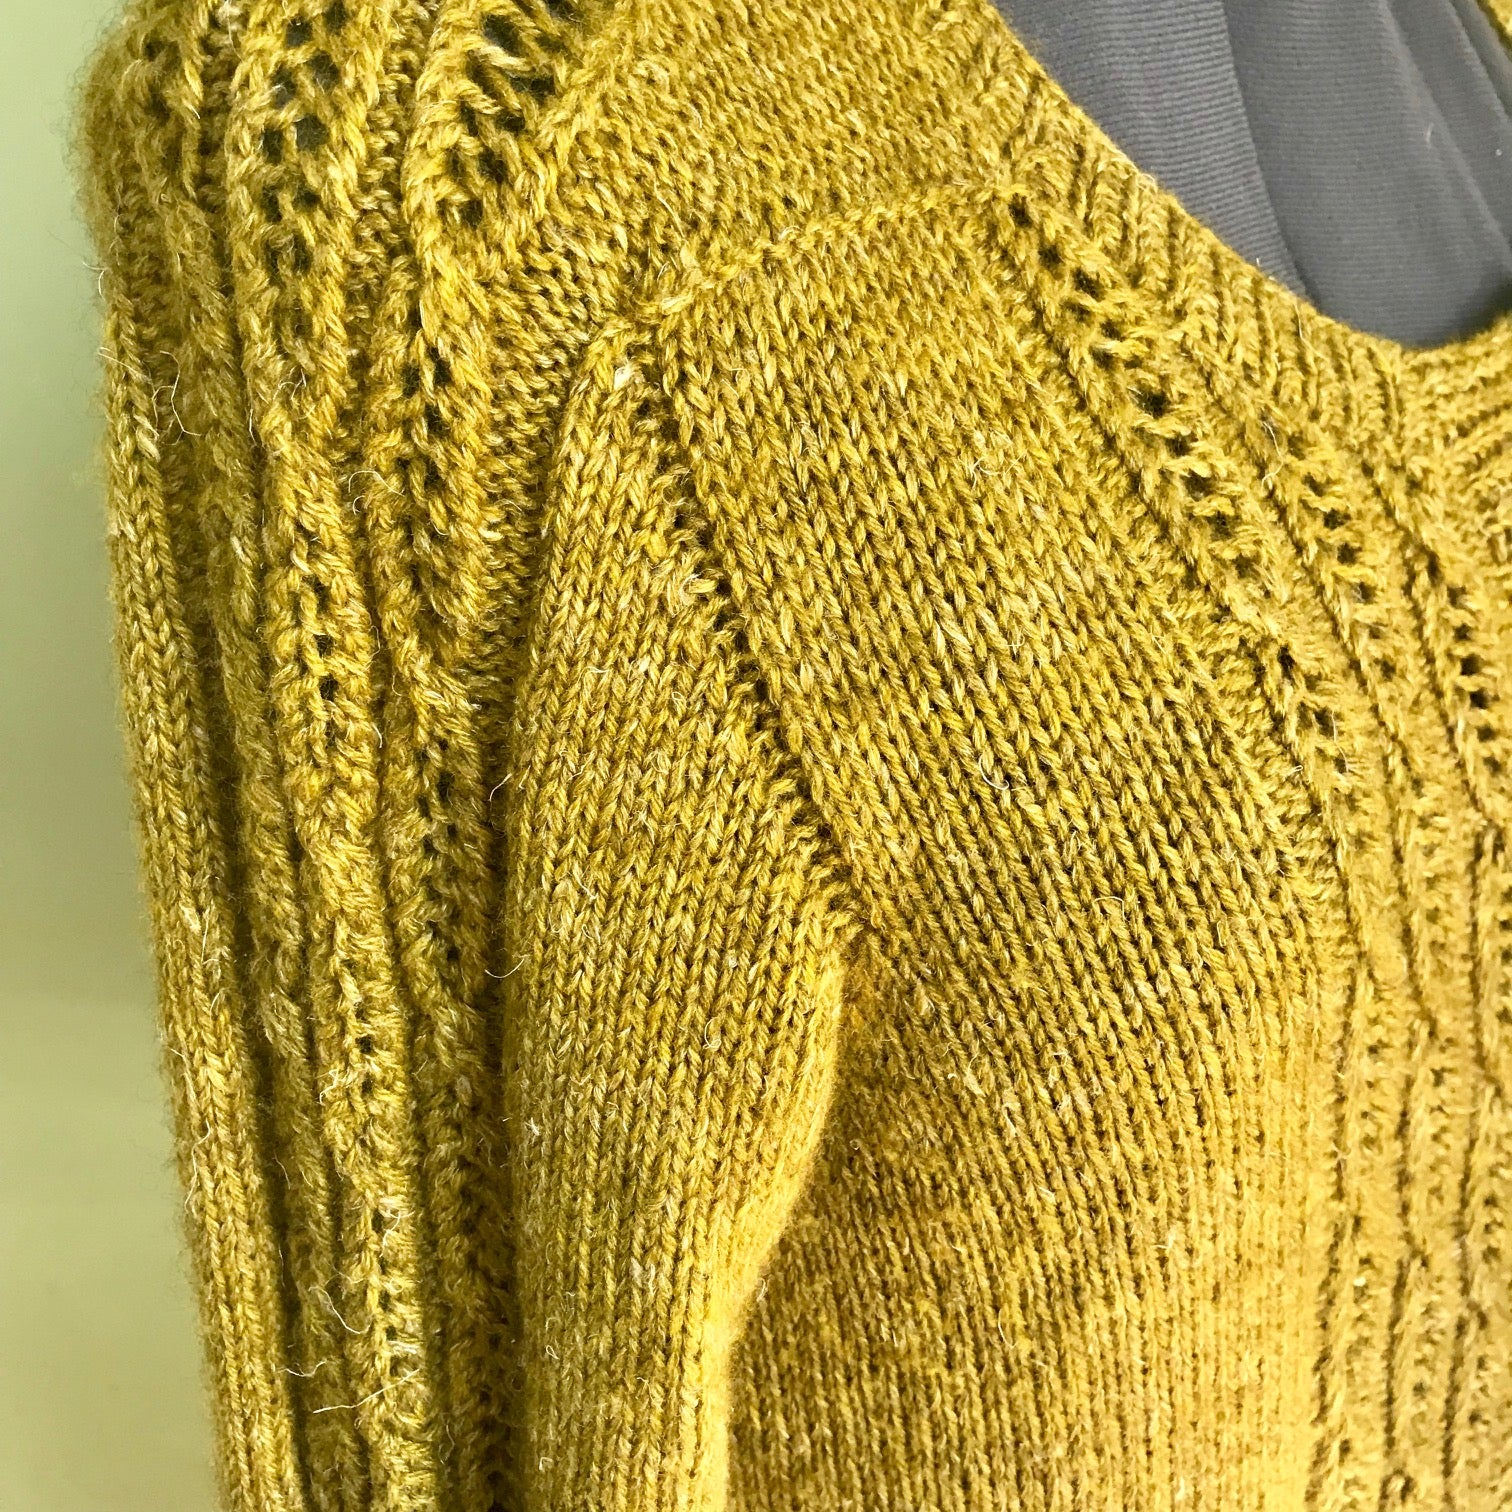 Learn to Knit: How to Tighten Up Loose Stitches - Stolen Stitches